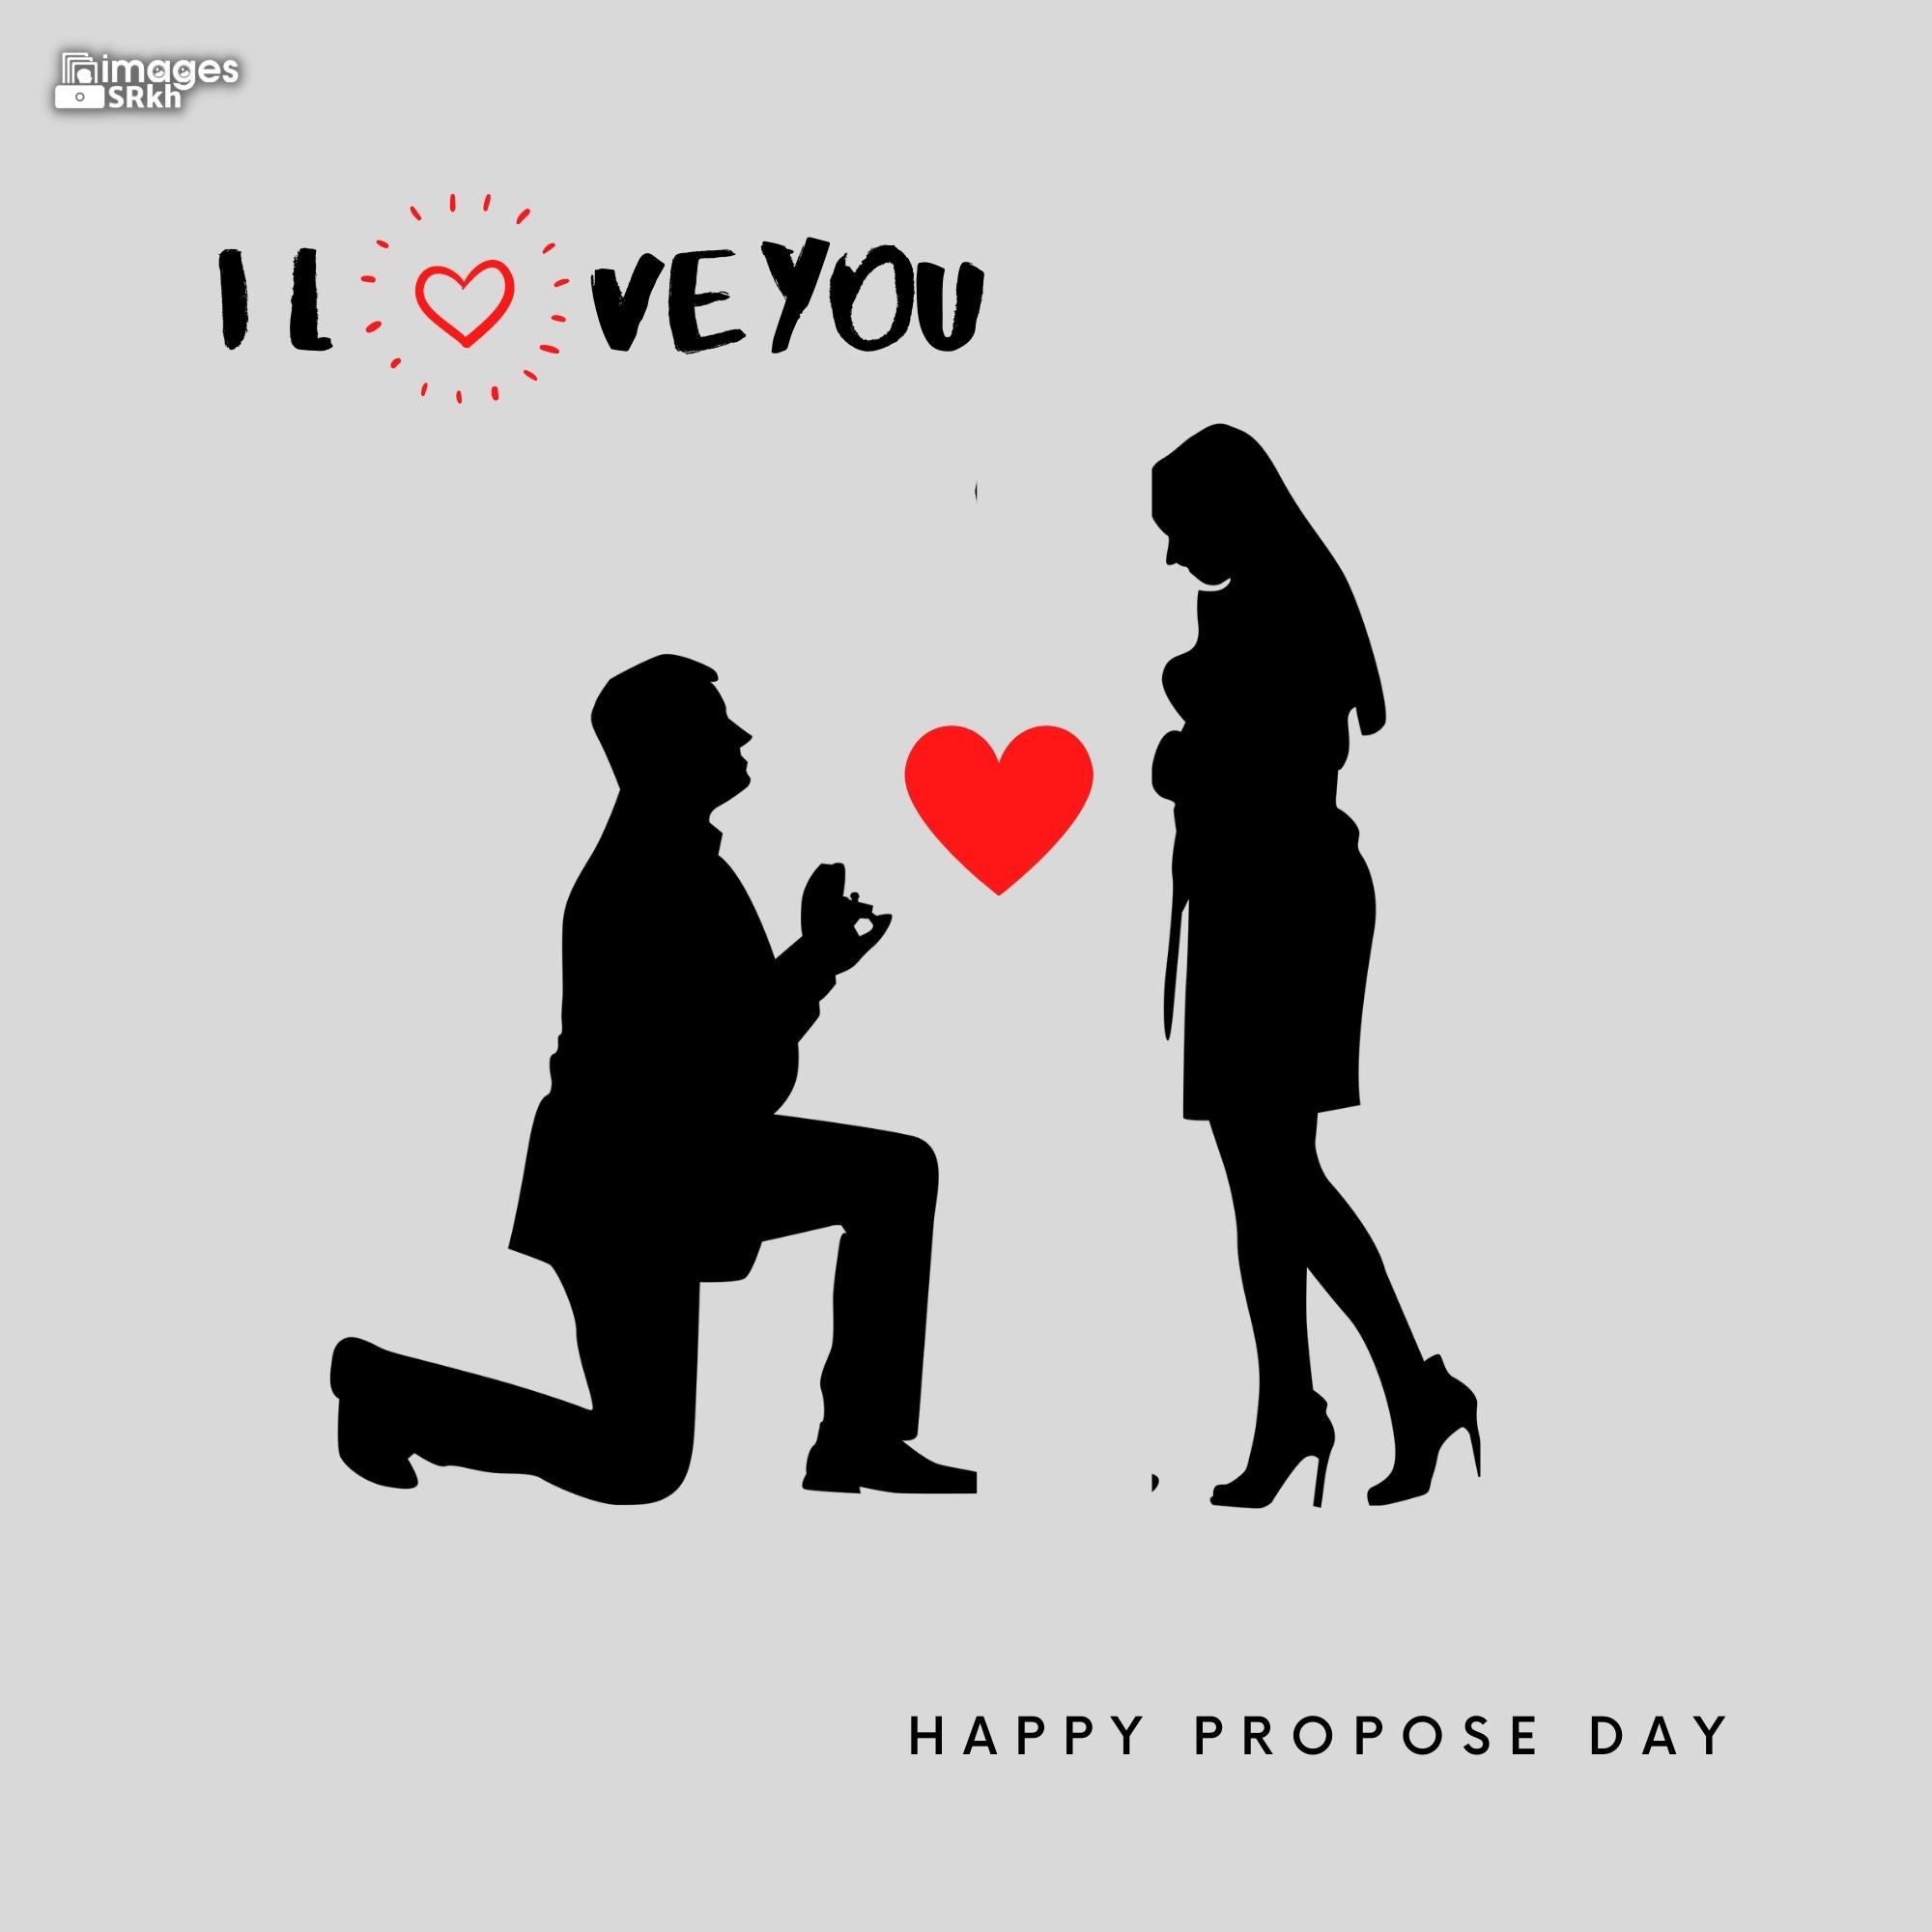 Happy Propose Day Images | 375 | I LOVE YOU